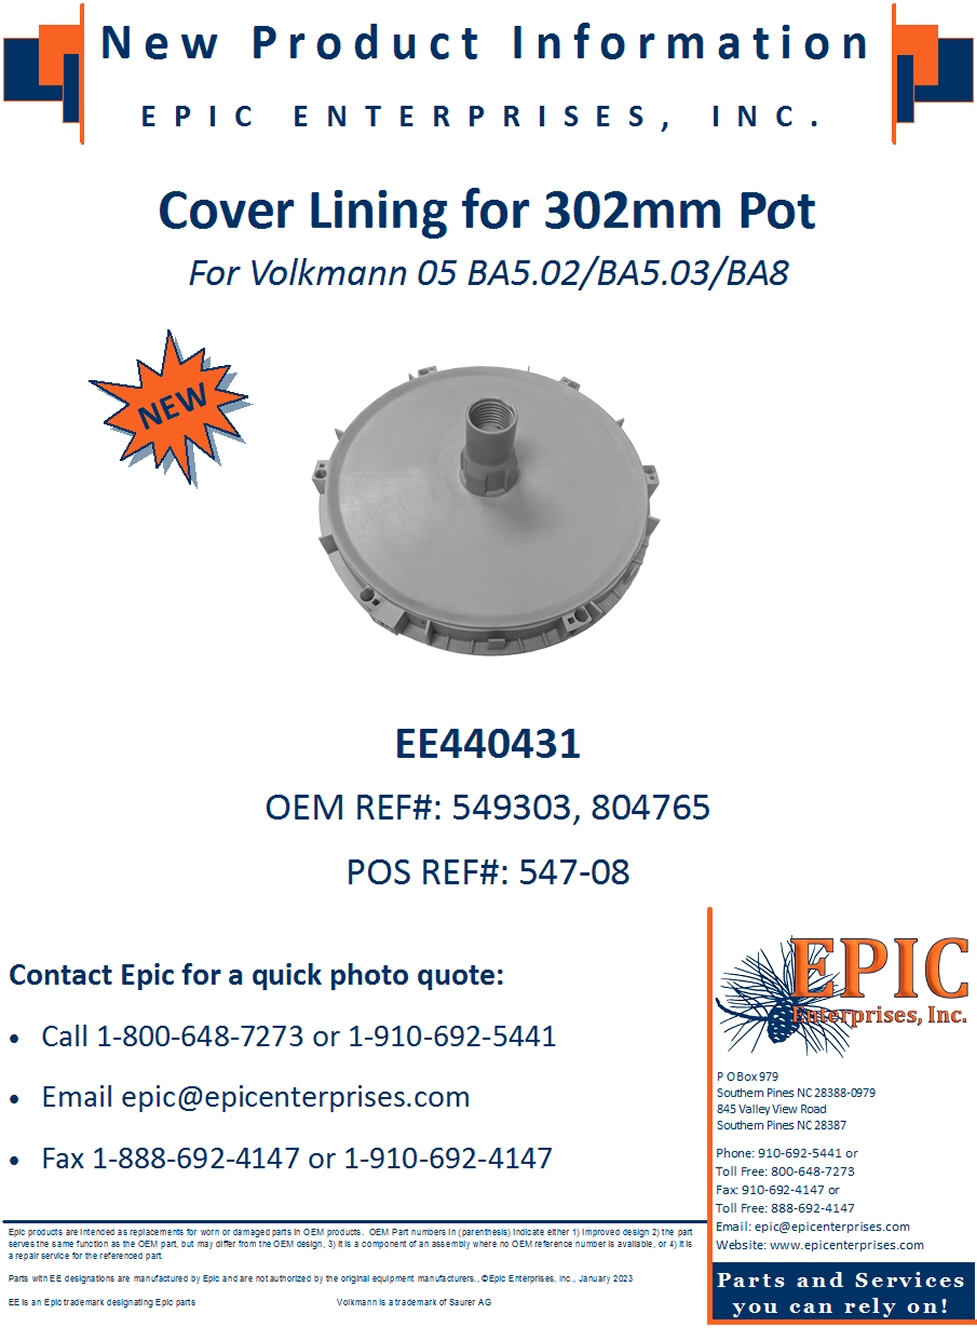 EE440431 Cover Lining for 302mm Pot for Volkmann 05 BA5.02/BA5.03/BA8